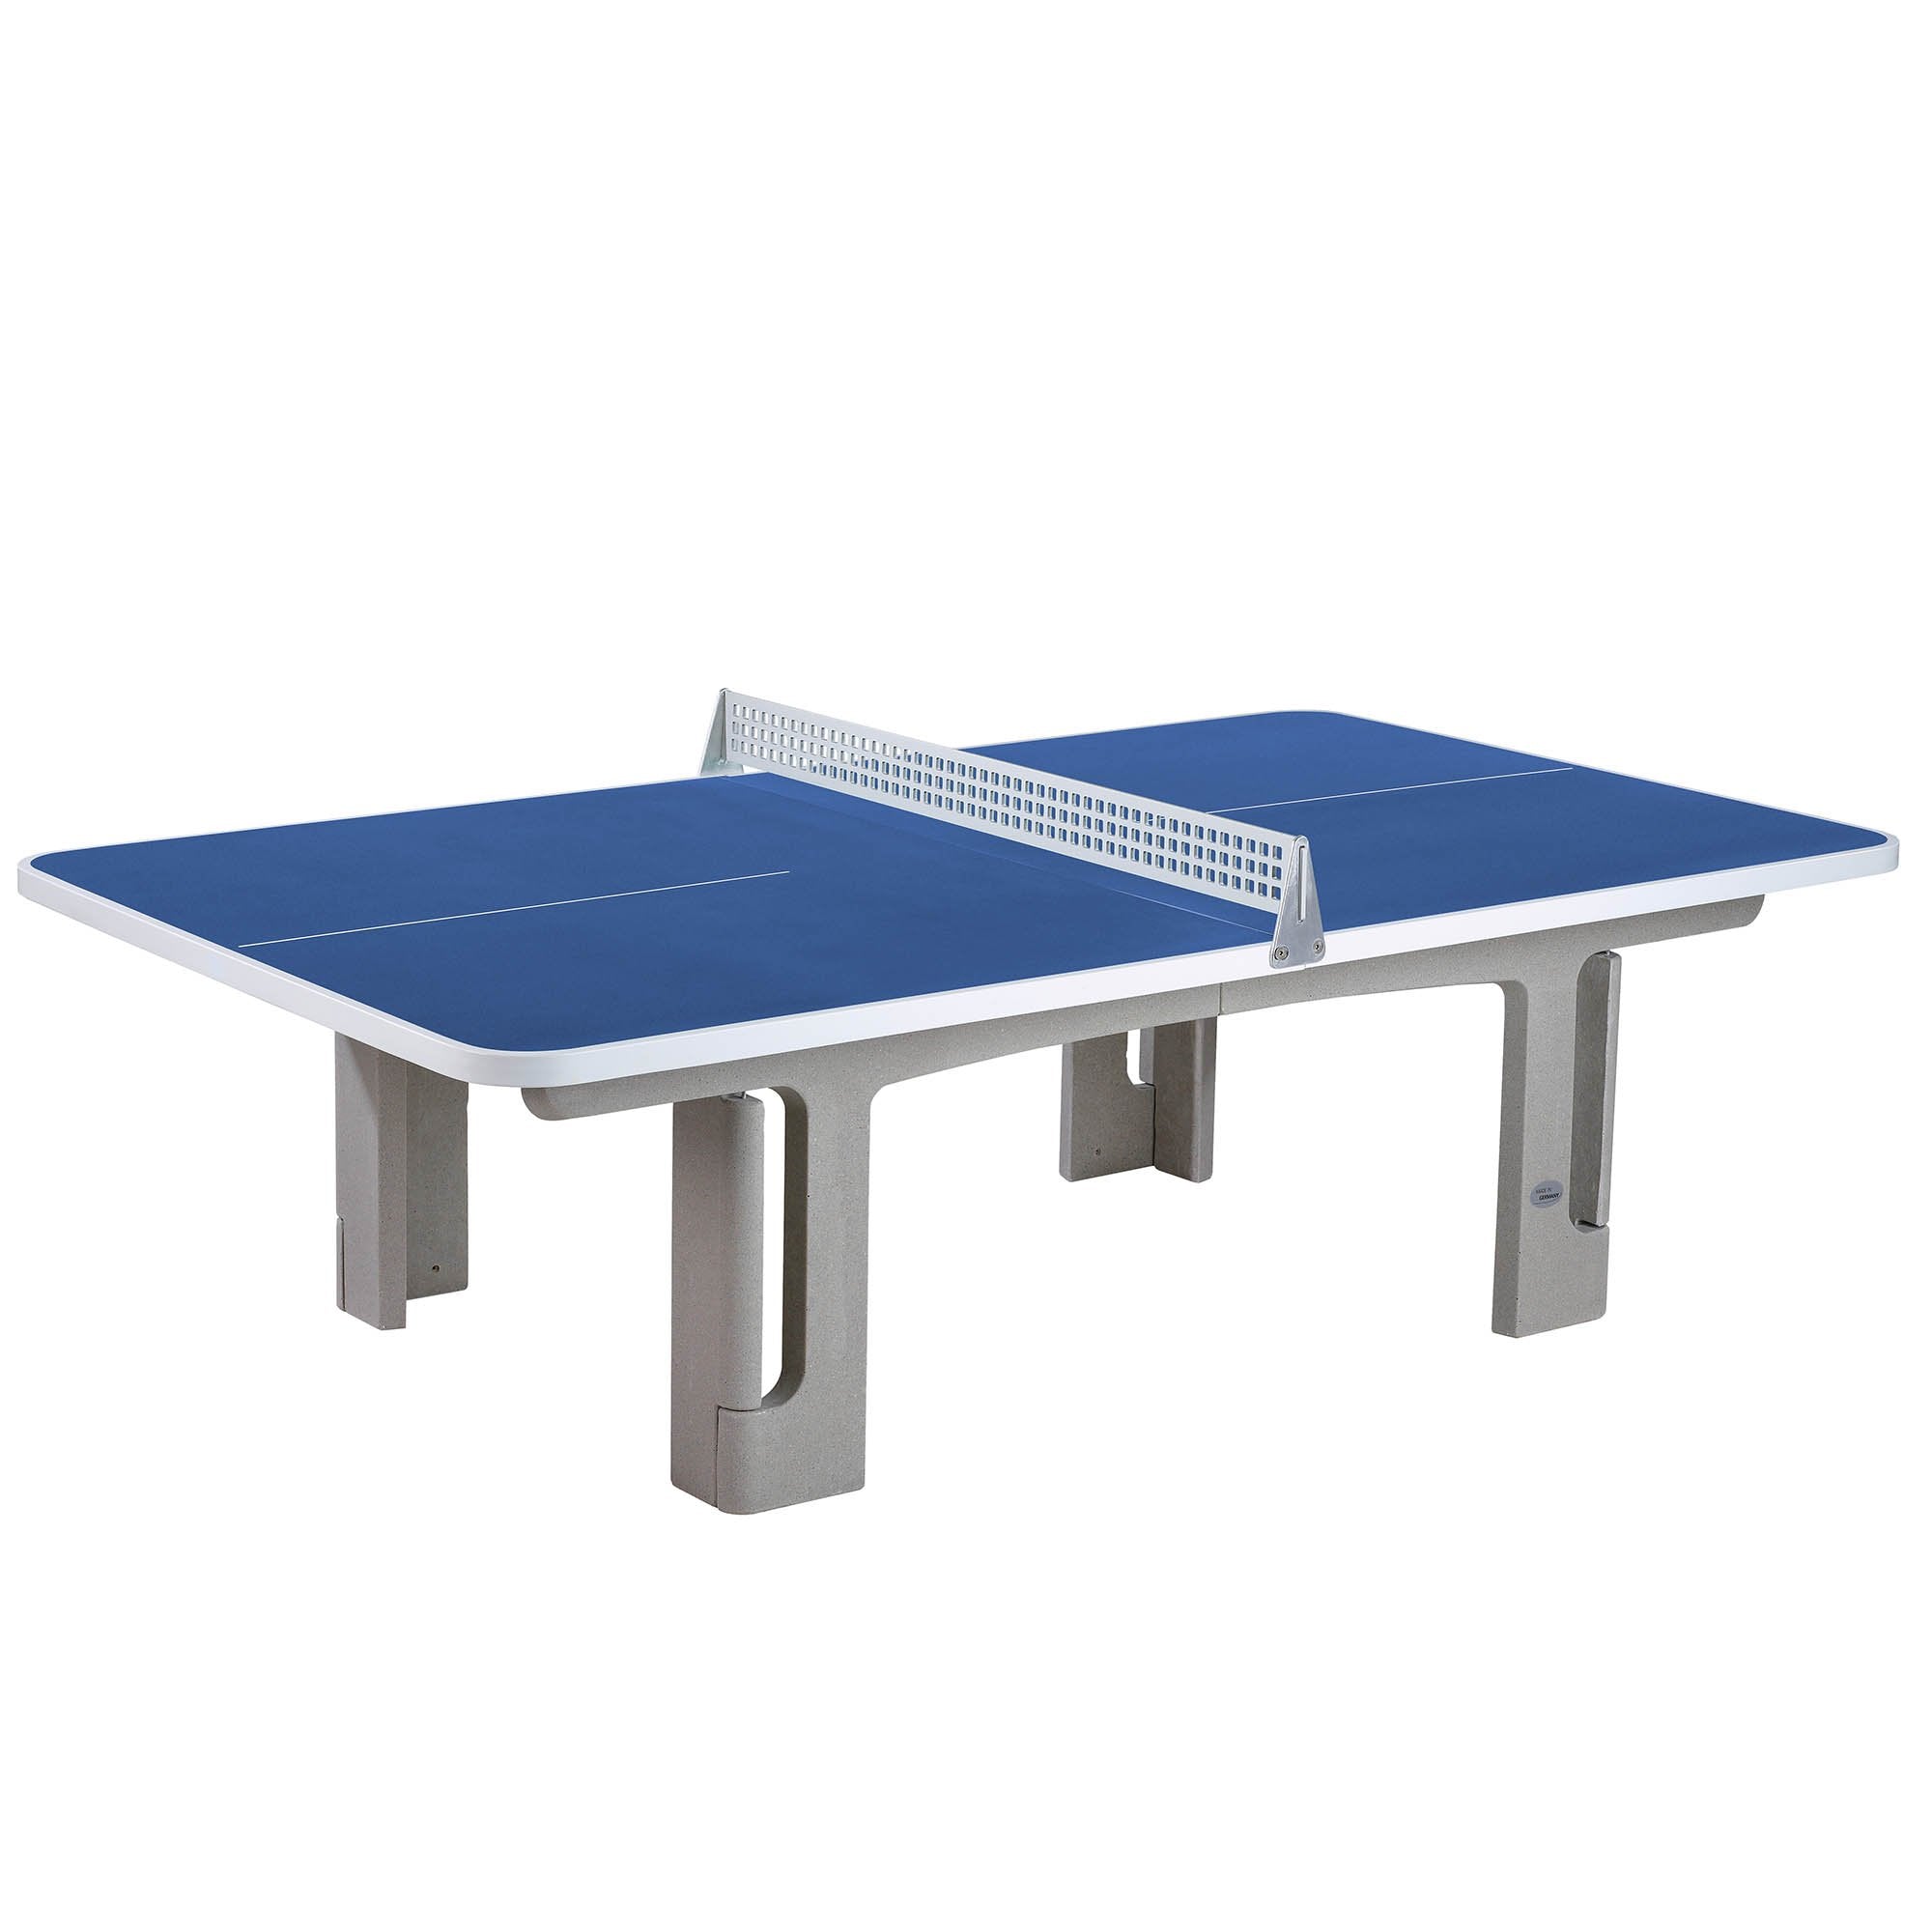 Butterfly B2000 Standard Concrete Table 30SQ Table Tennis Table